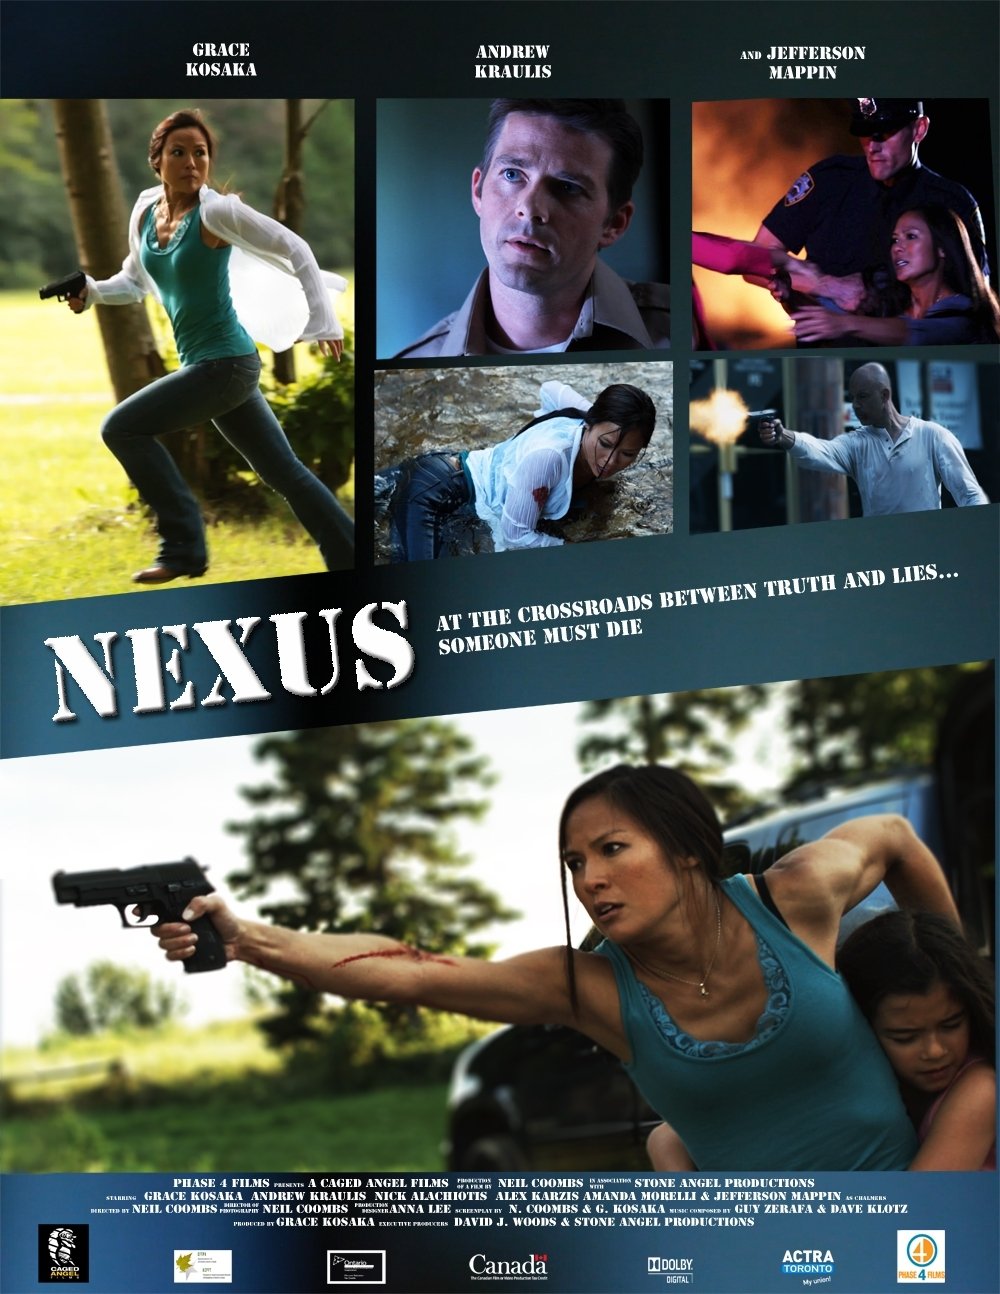 Nexus - feature film poster. Caged Angel Films, Director Neil Coombs, starring Grace Kosaka, Andrew Kraulis & Jefferson Mappin.